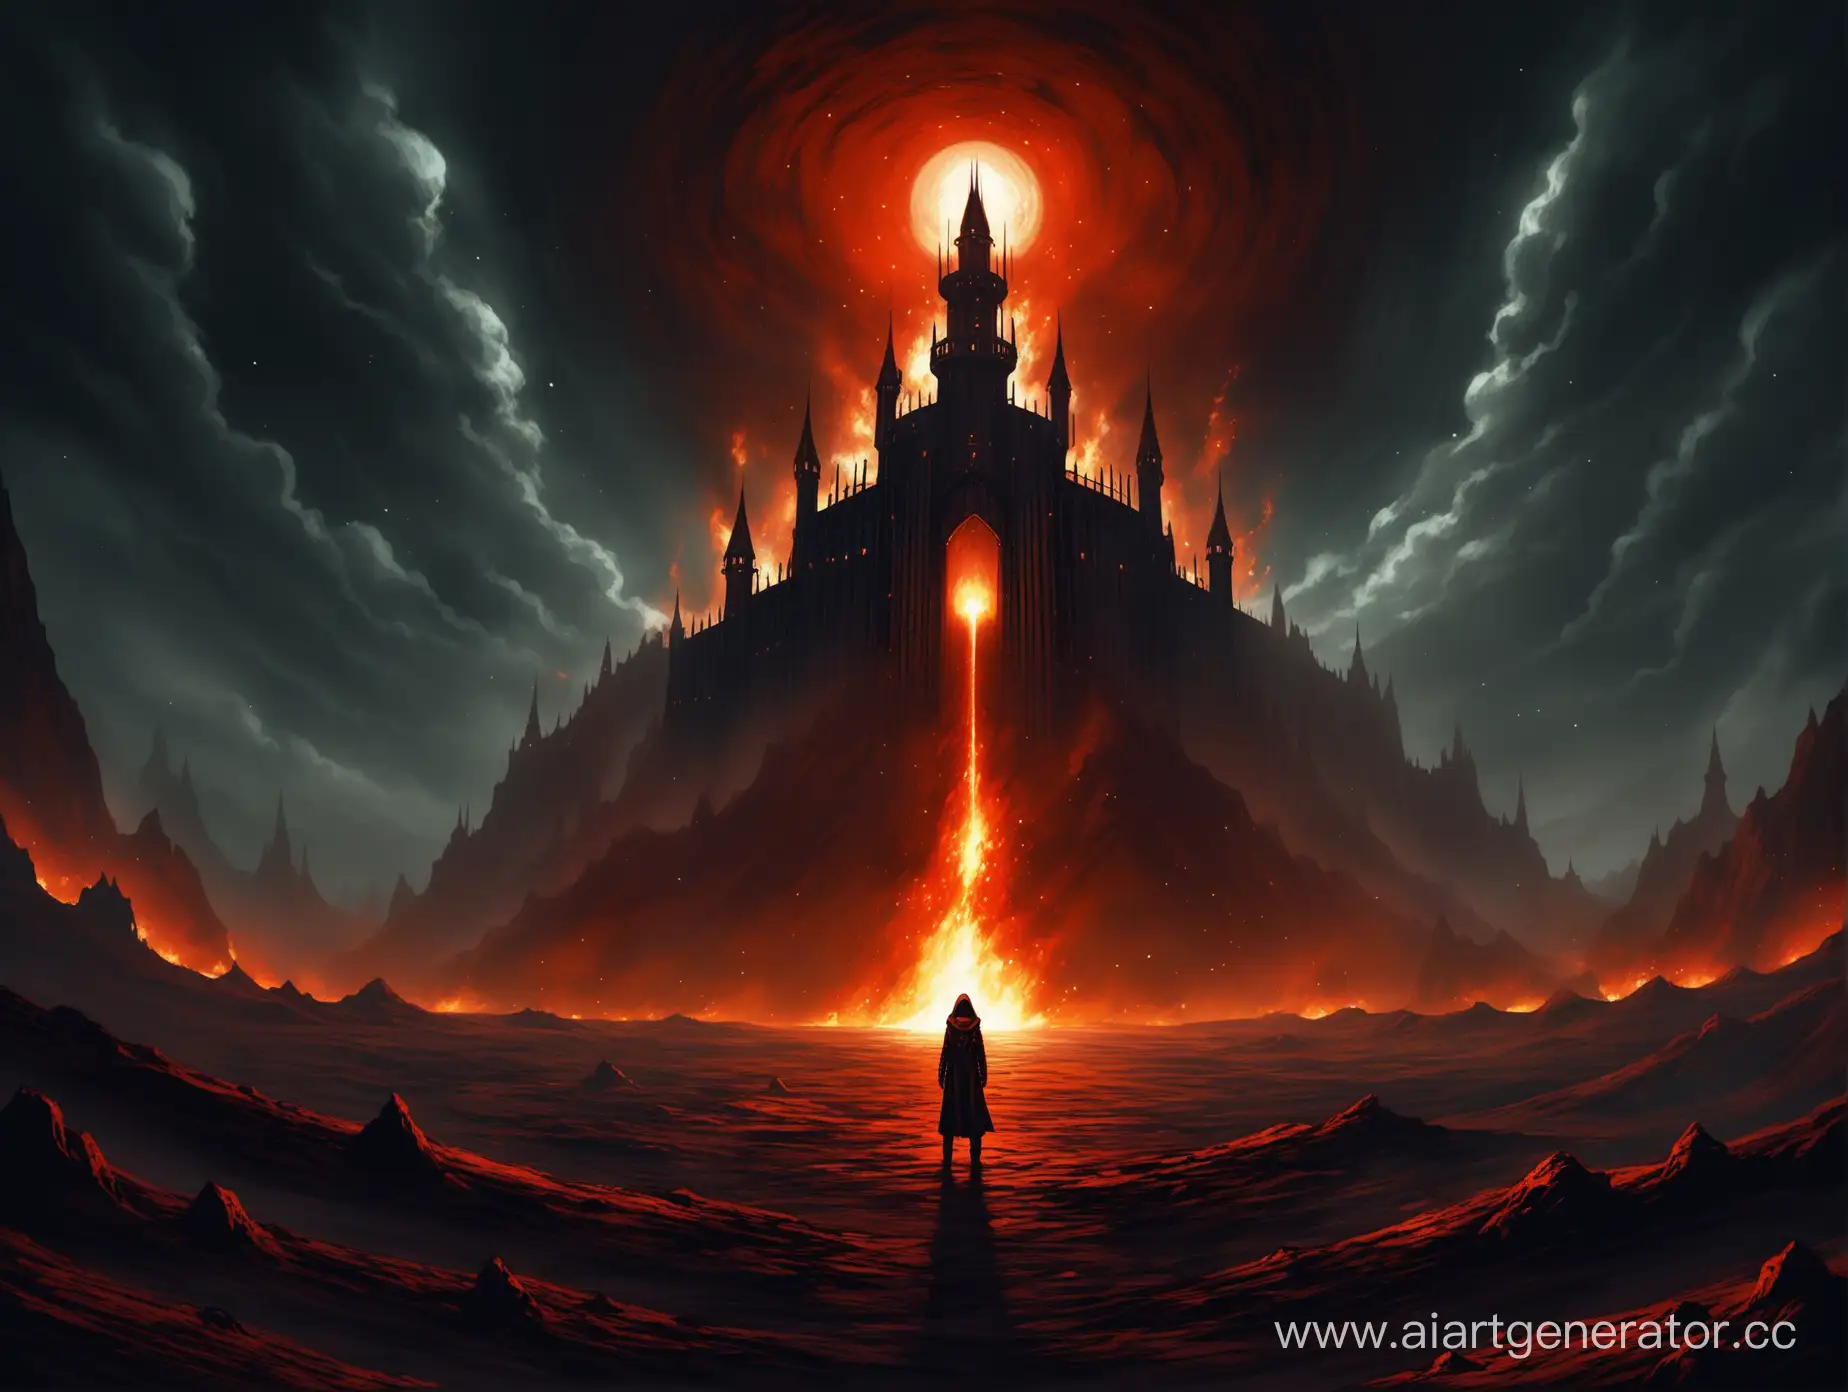 Gothic-Citadel-on-Mars-Atmosphere-of-Fire